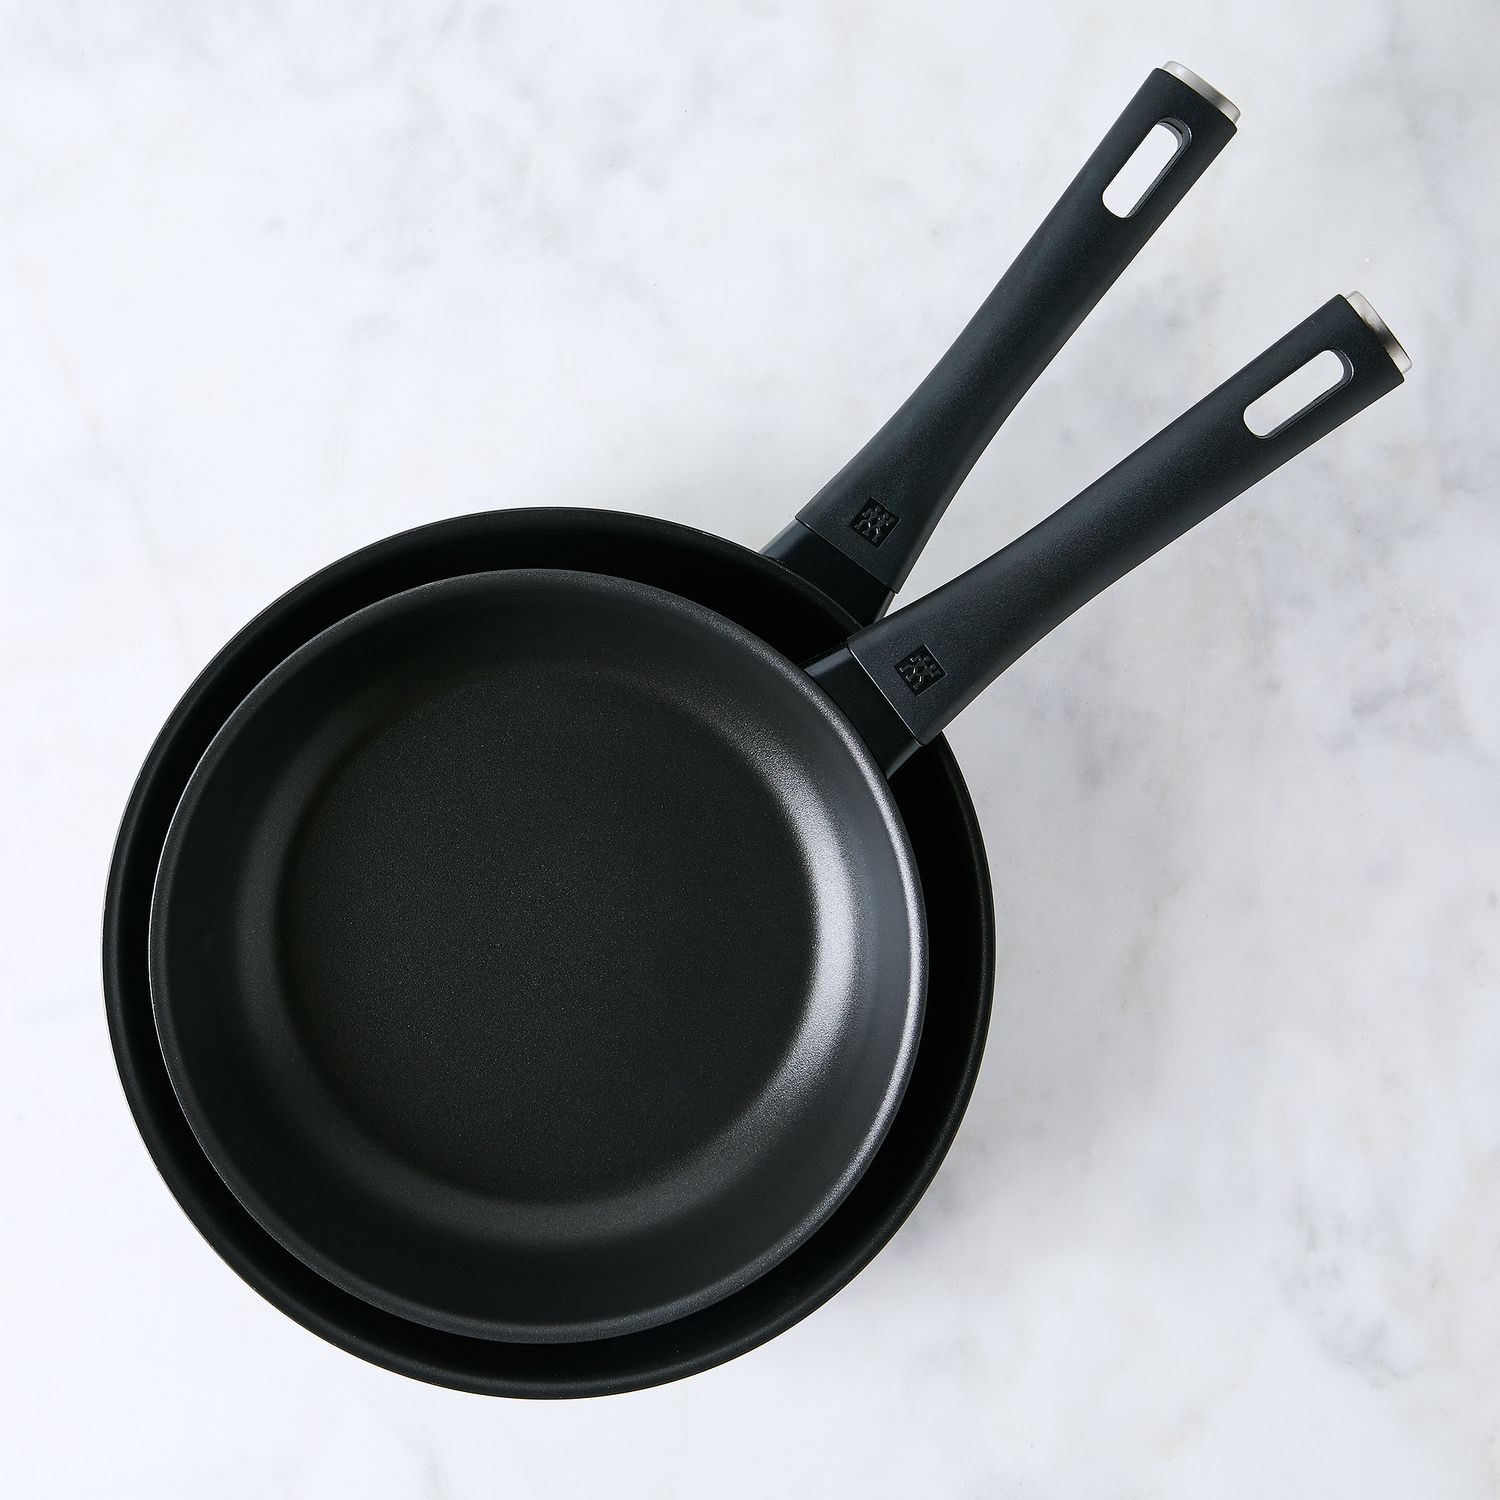 Zwilling Madura Plus 8 inches Non-Stick Frying Pan